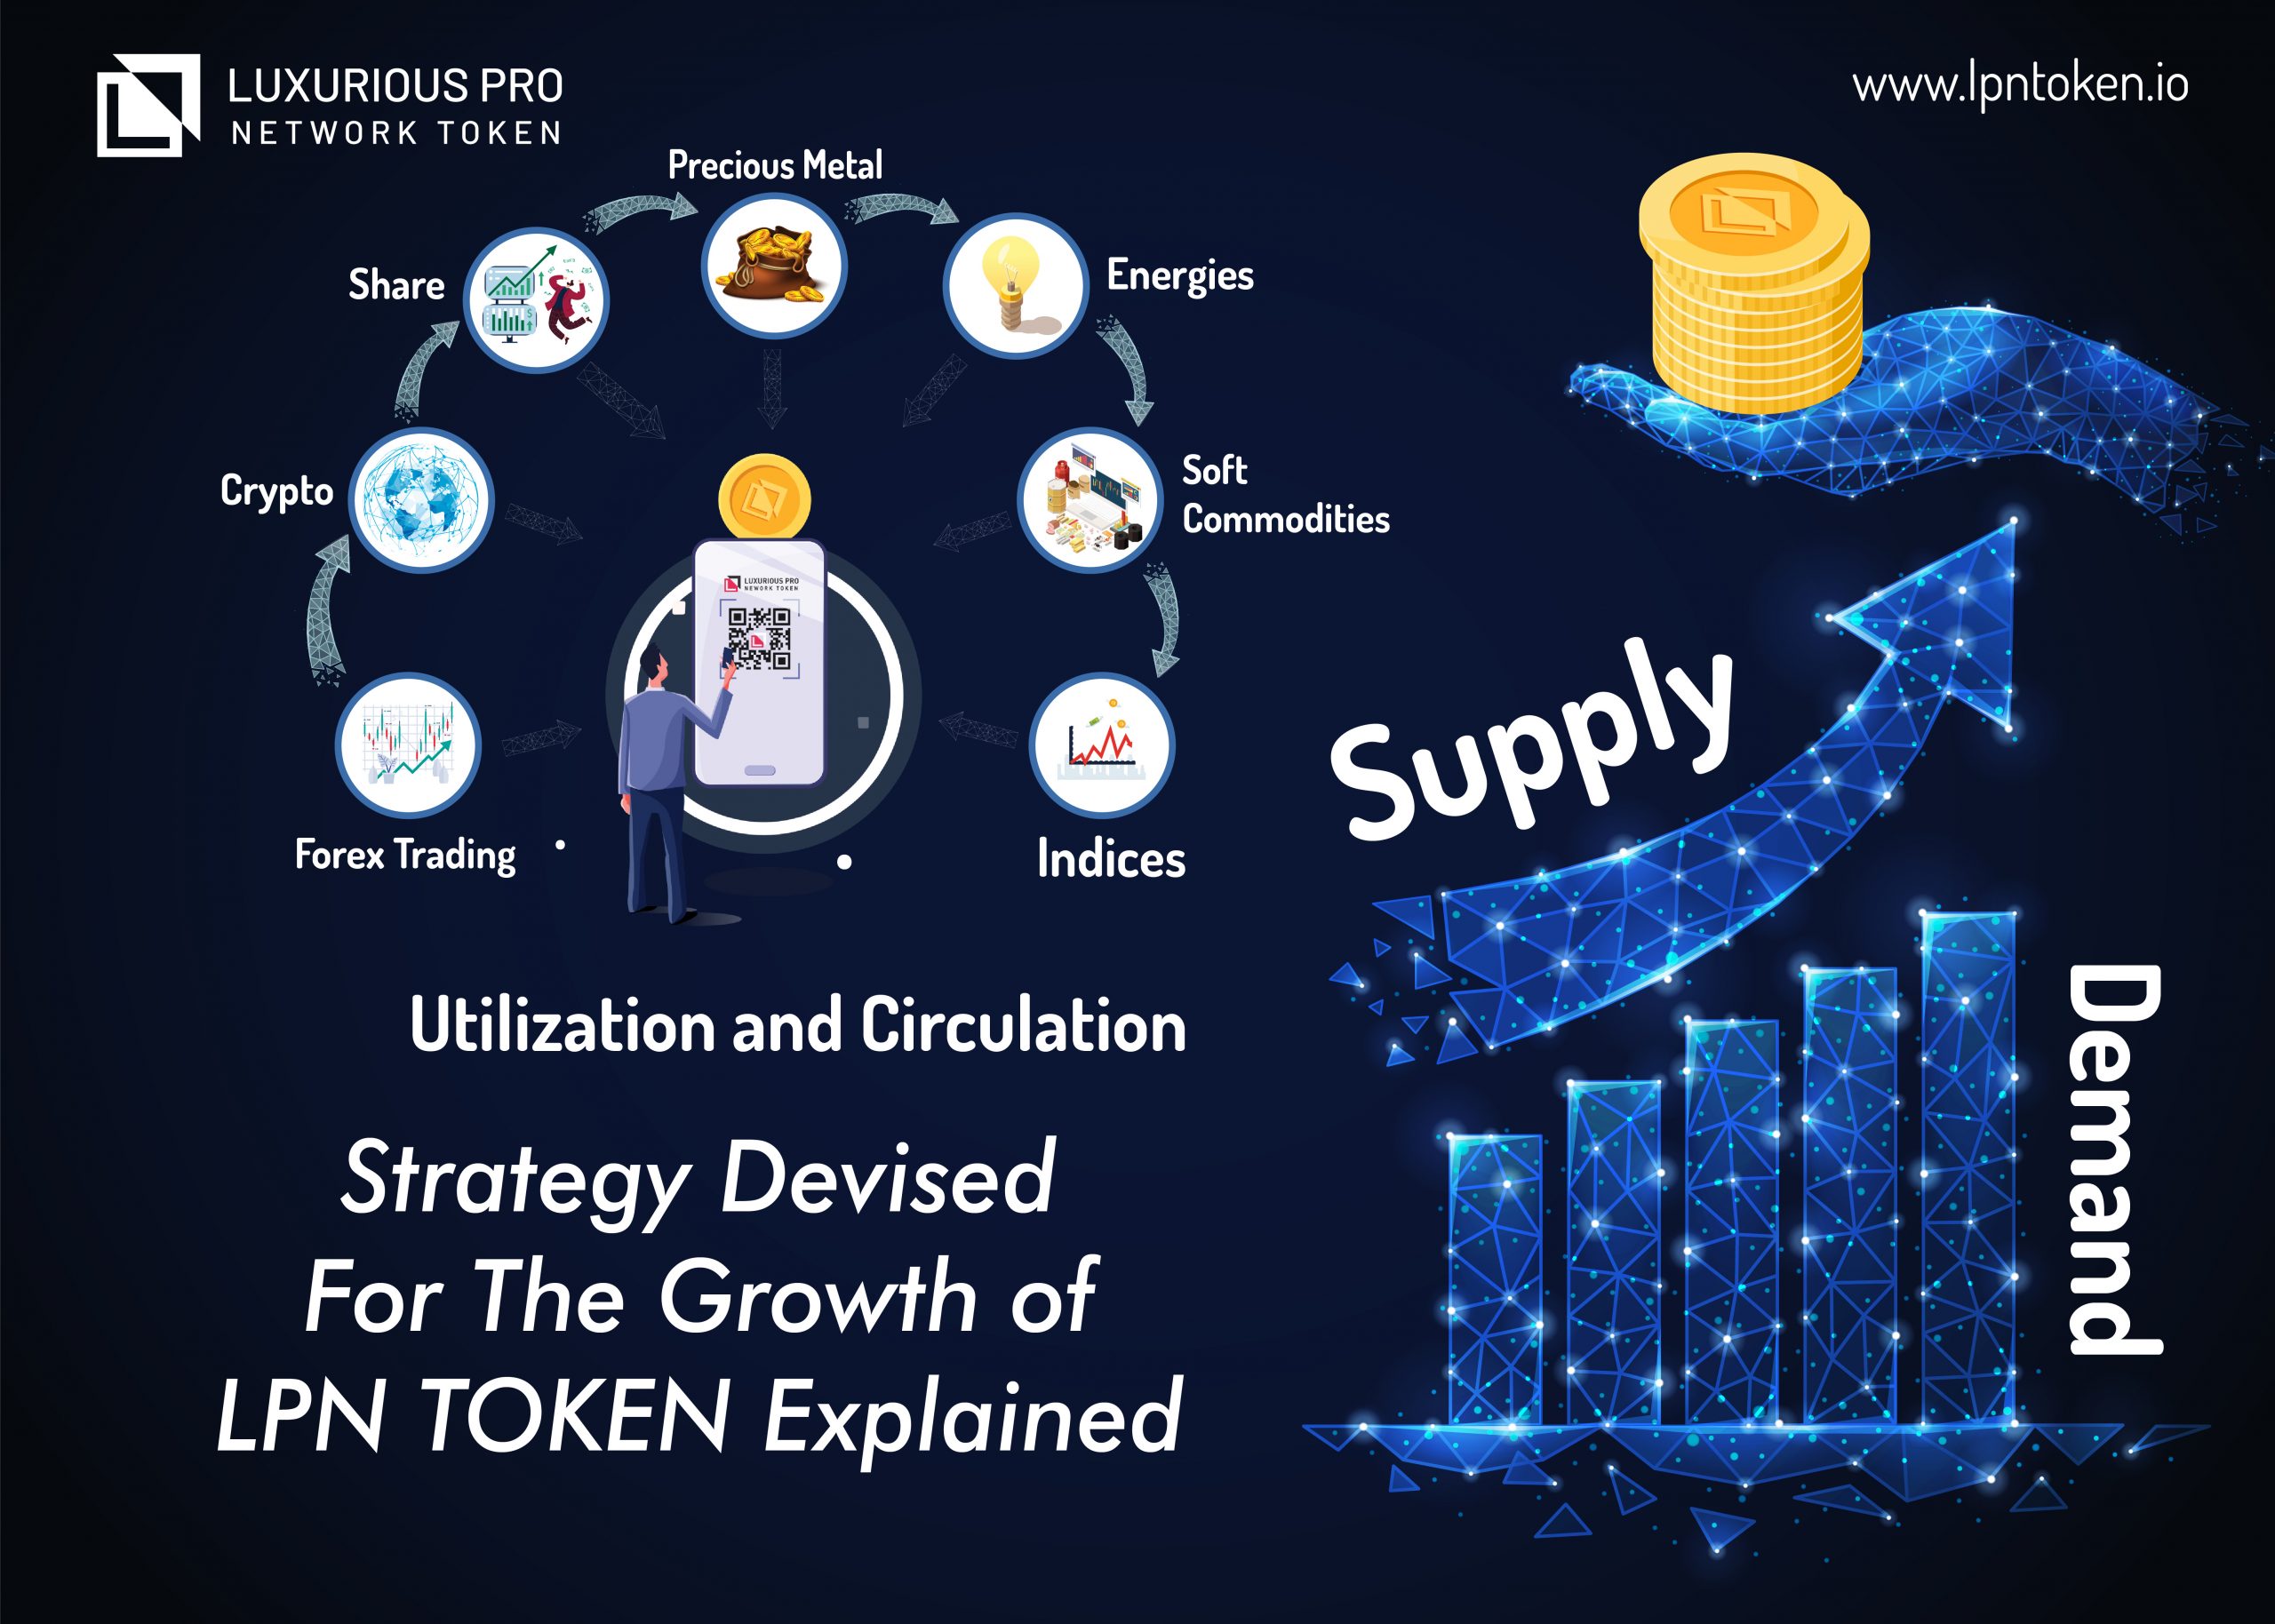 Strategy Devised For The Growth of LPN TOKEN Explained